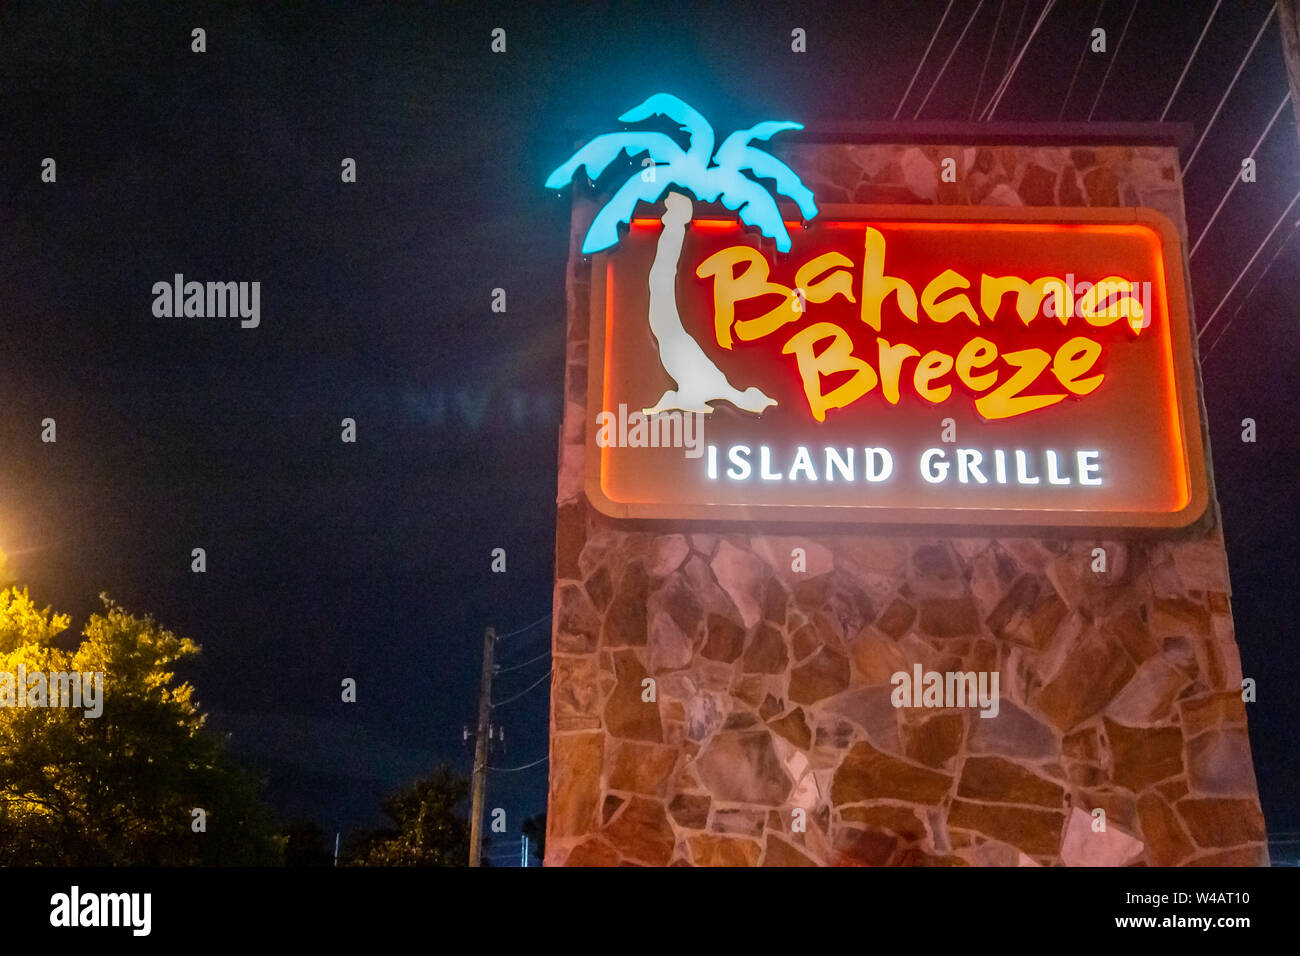 Kennesaw, GA - July 12th 2019: Exterior photos at night of Bahama Breeze - Tropical island beach themed American chain restaurant with Caribbean inspi Stock Photo